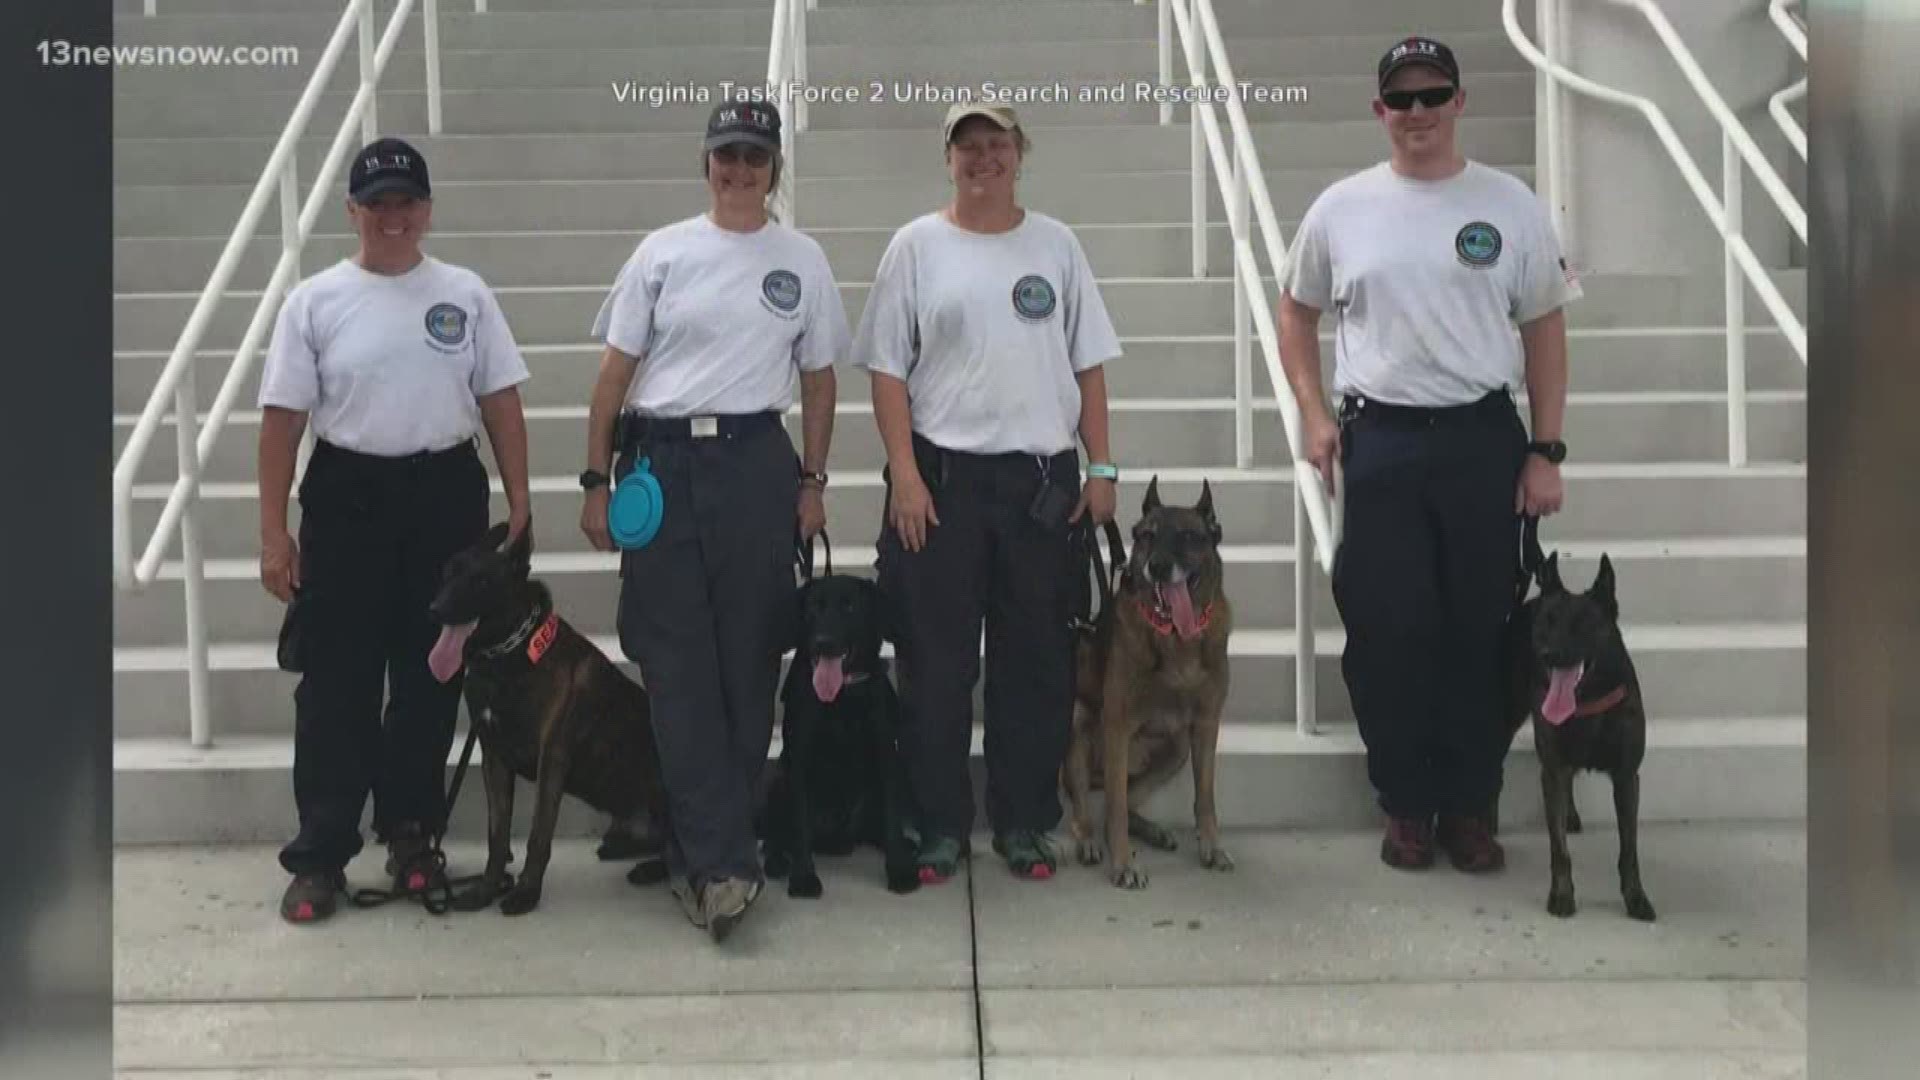 A group of dogs from our area is ready to help hurricane victims. Four k9s with the Virginia-based Task Force 2 are stationed in Florida ahead of Hurricane Dorian.